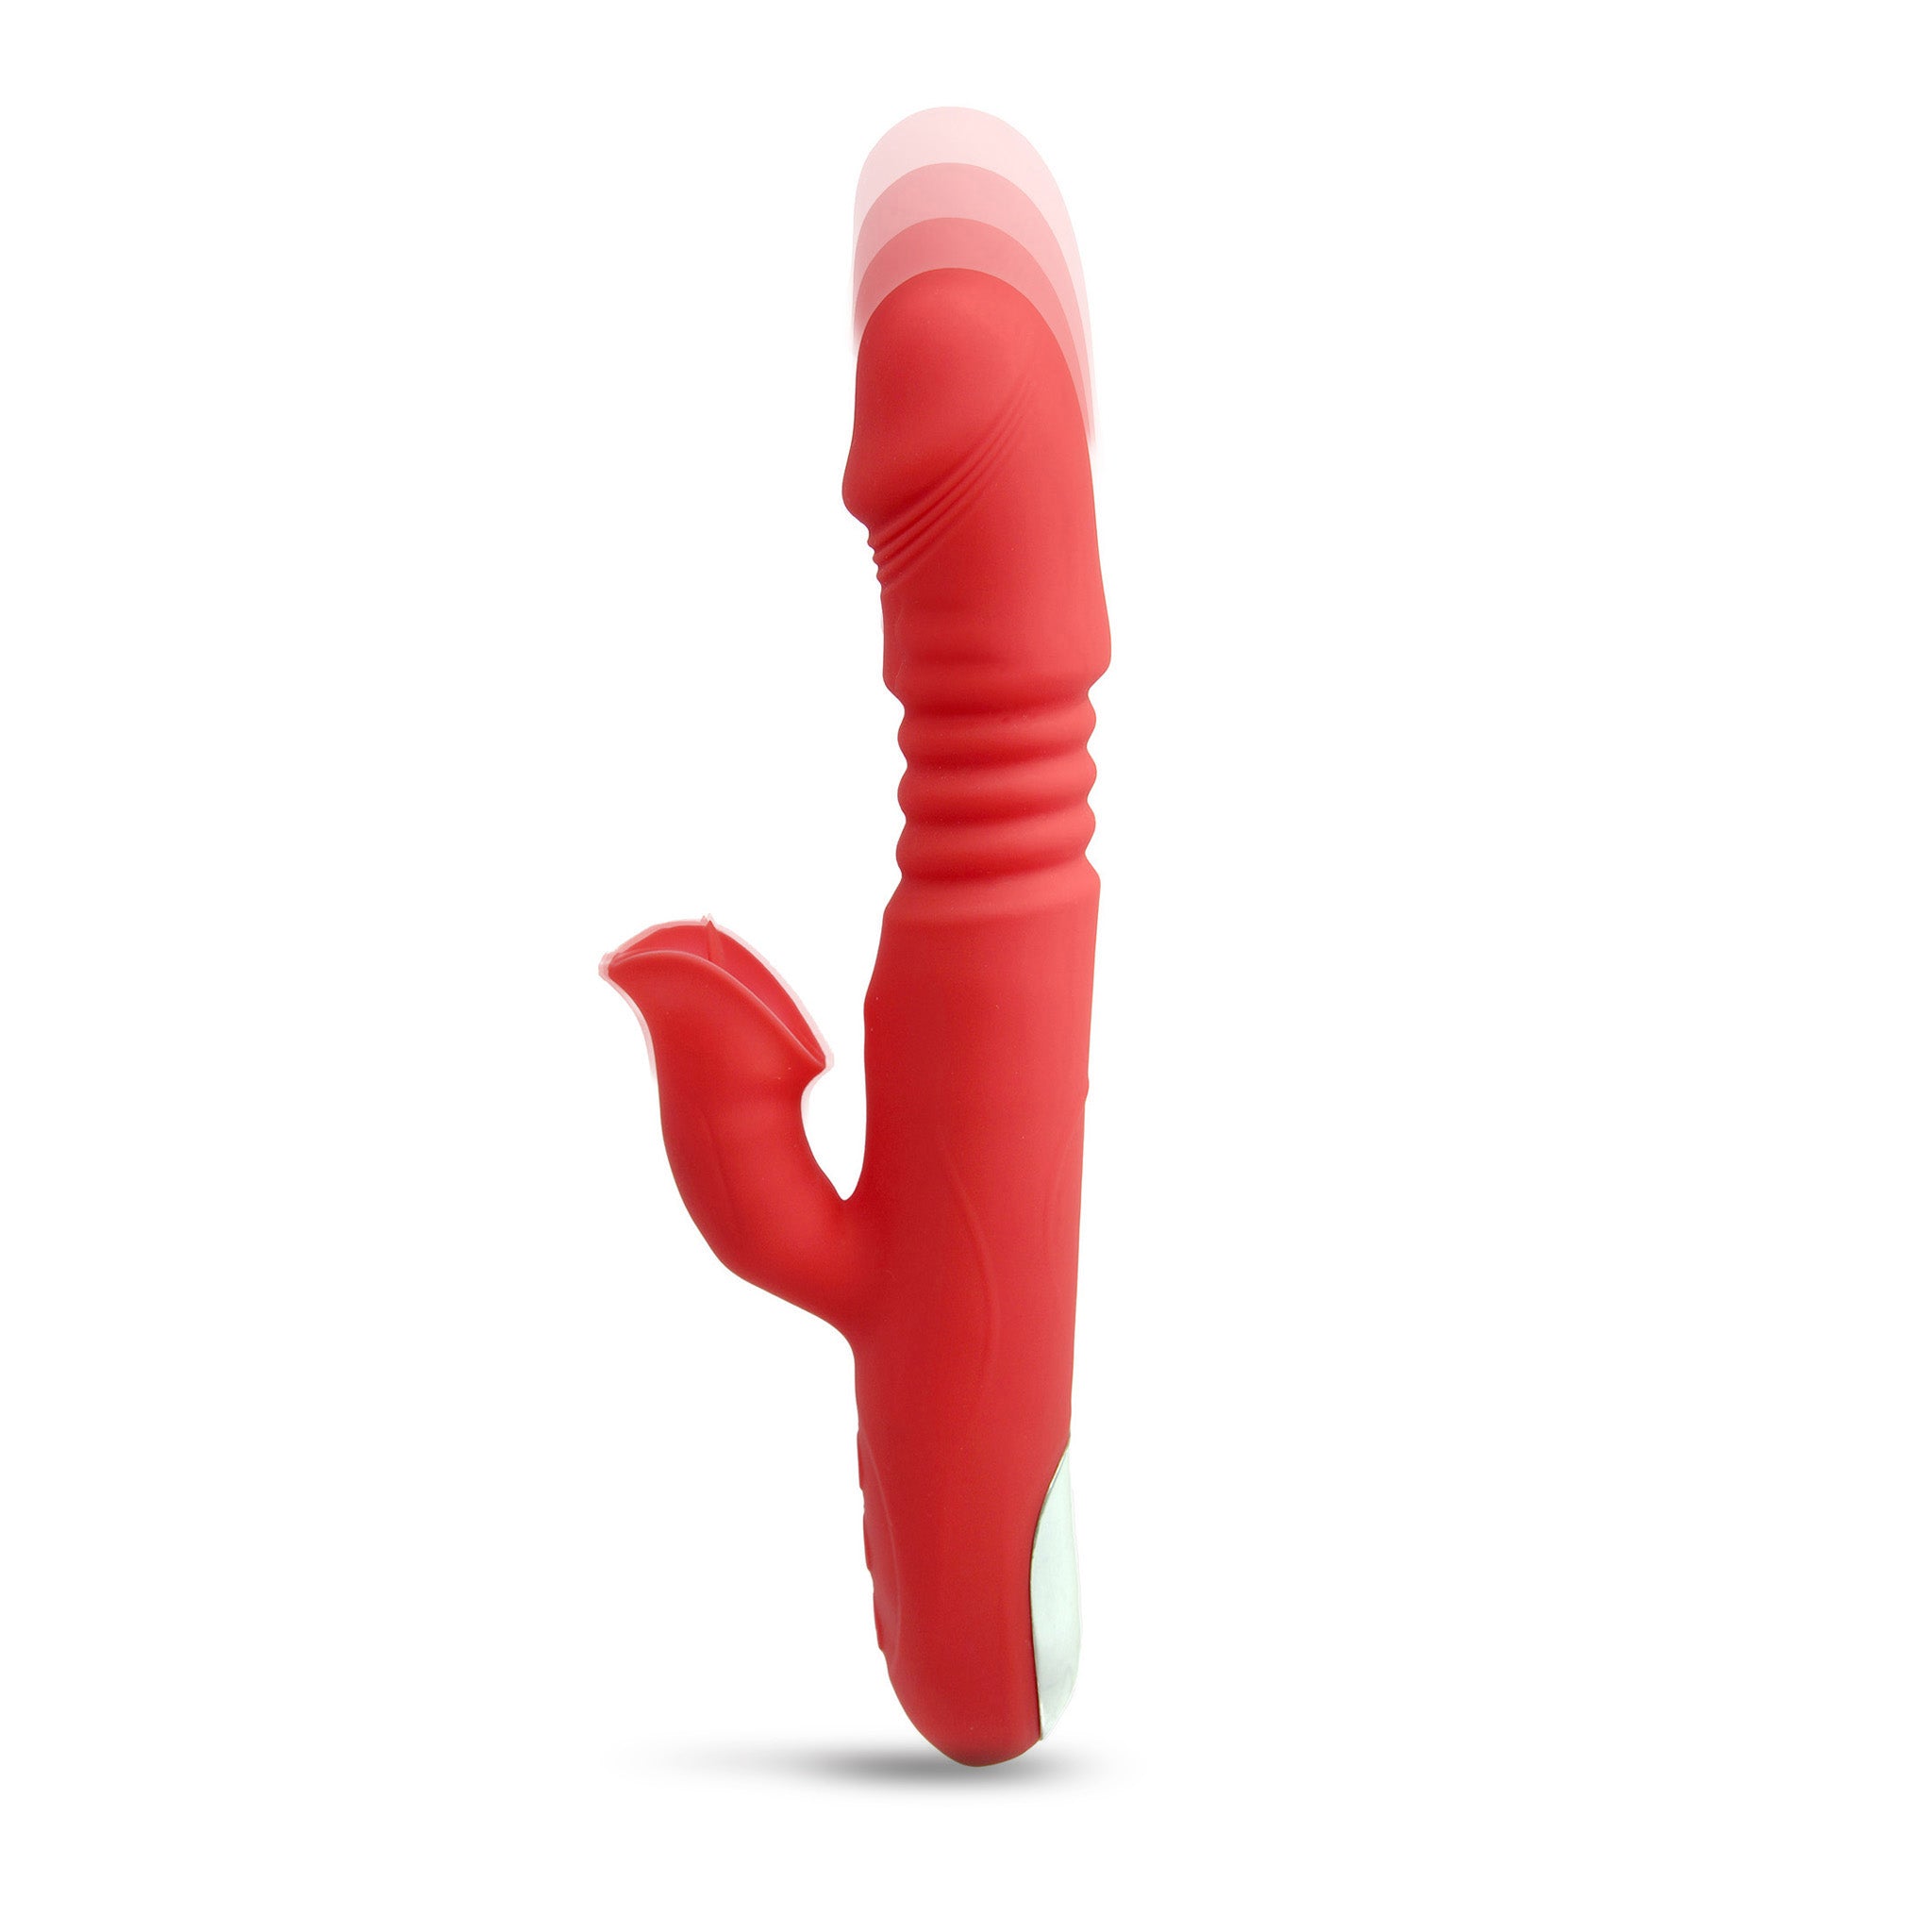 Clitoral Licking Thrusting Stroking Rabbit Vibrator Sex-toys for Women Couples